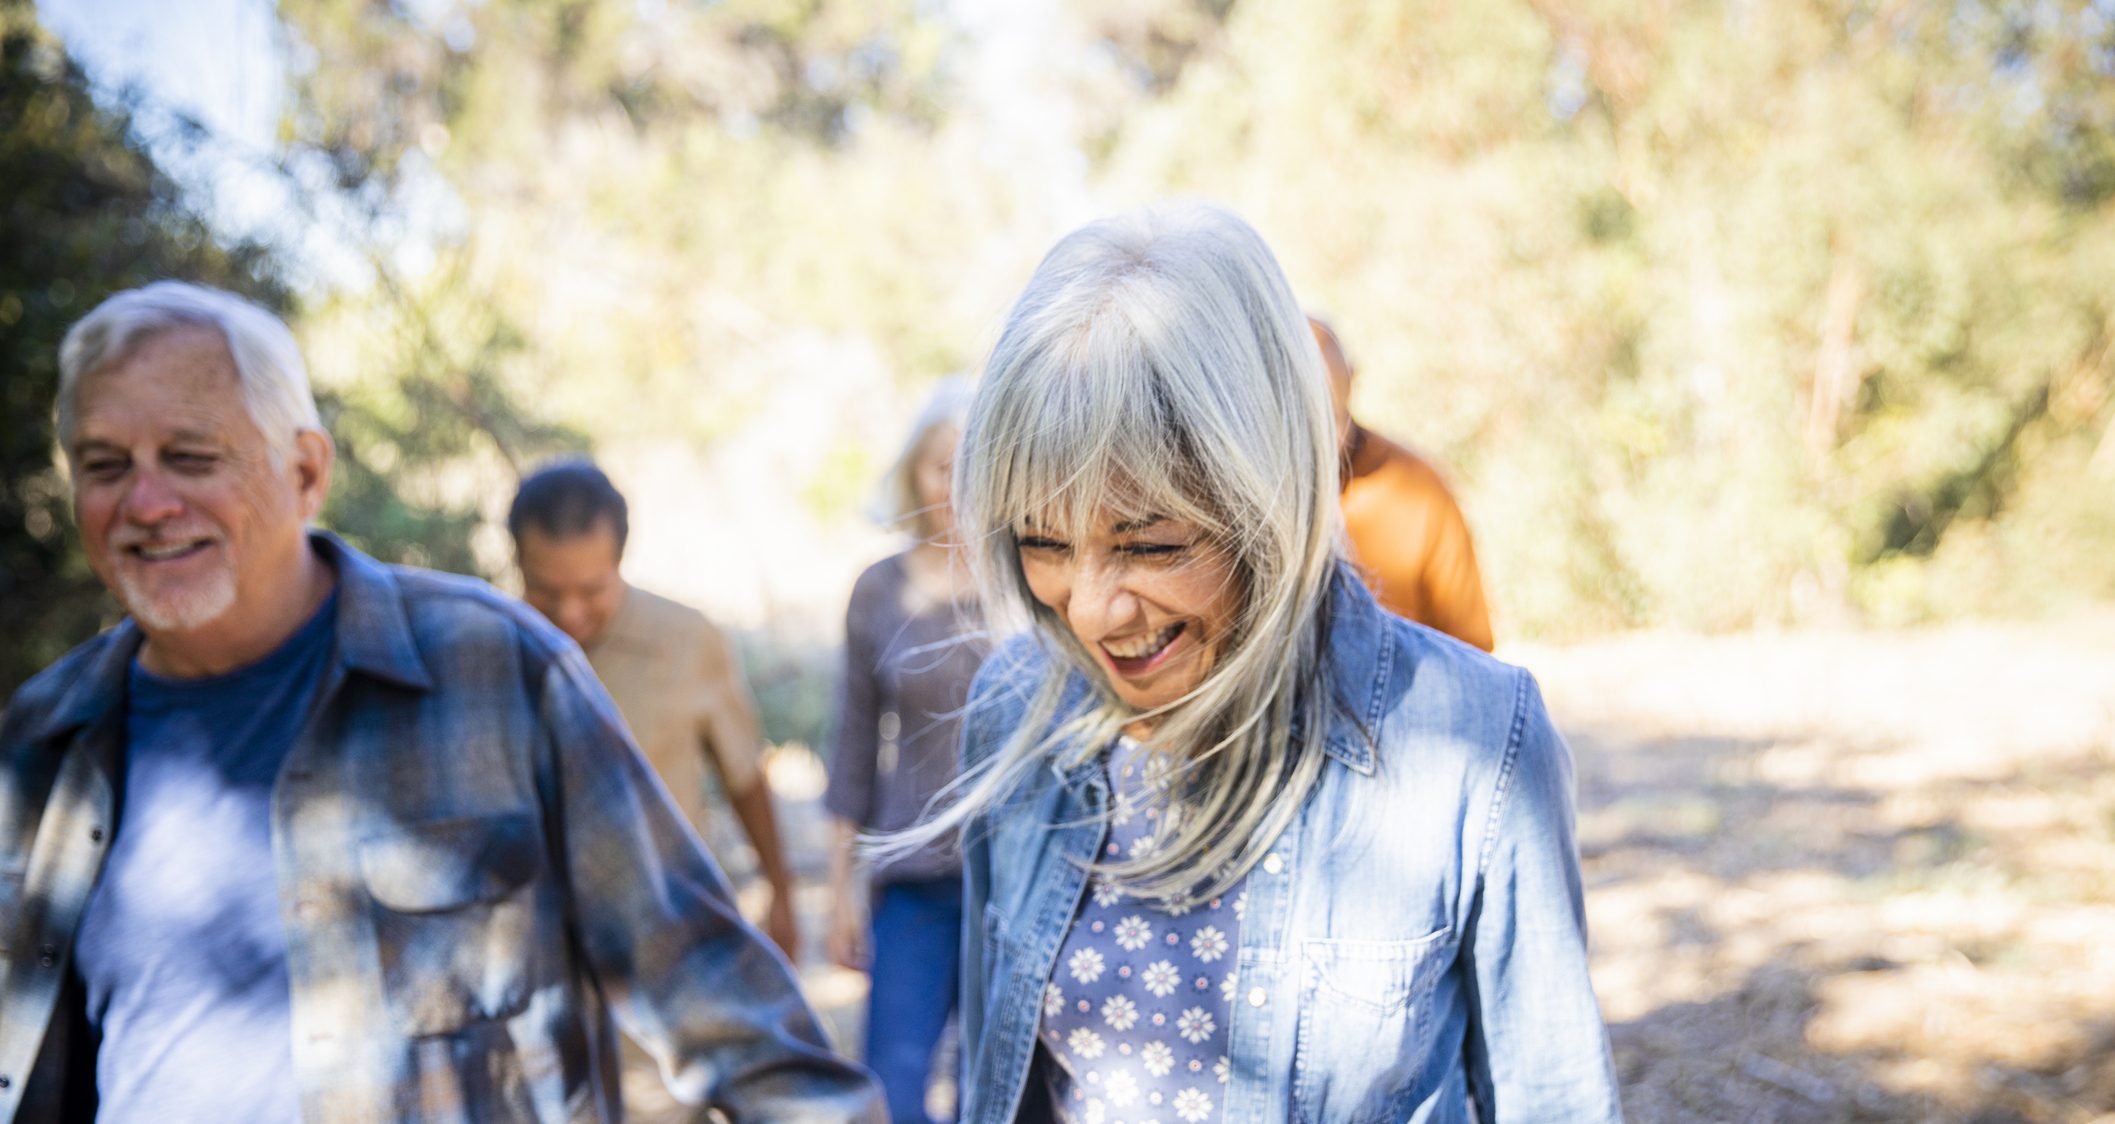 A group of senior friends led by a woman with white hair exploring outdoors.